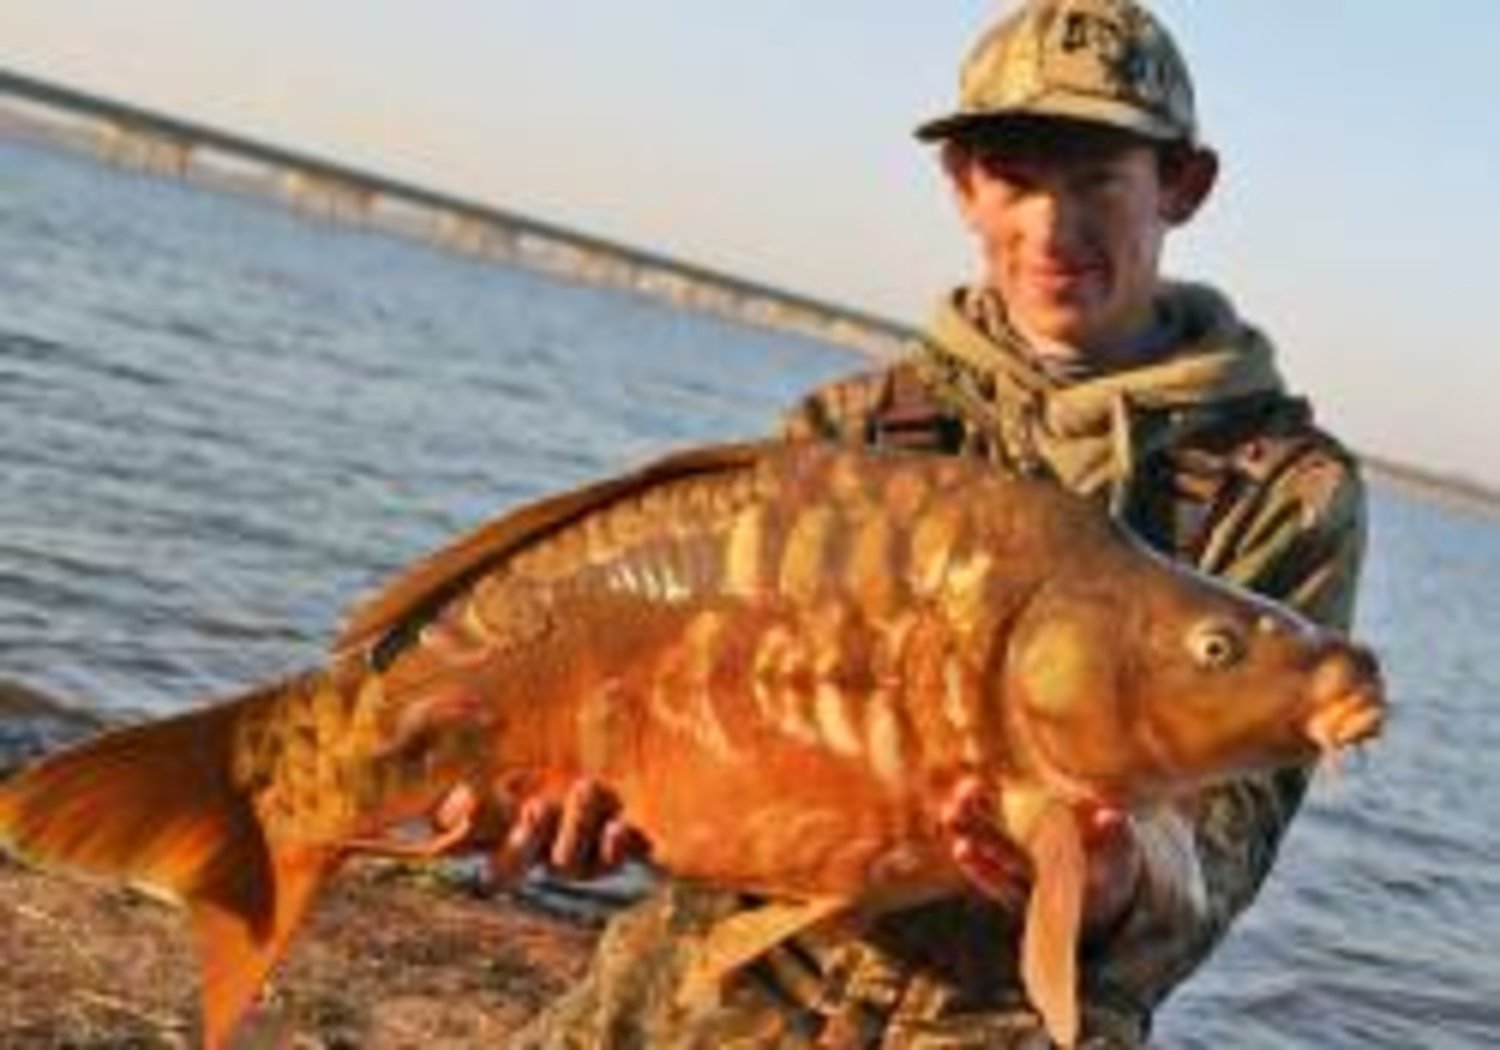 2014 is here, and Lake Fork is already producing astonishing fish. Pictured here is Austin Anderson with a beautiful mirror carp he caught on the lake on Jan 2.